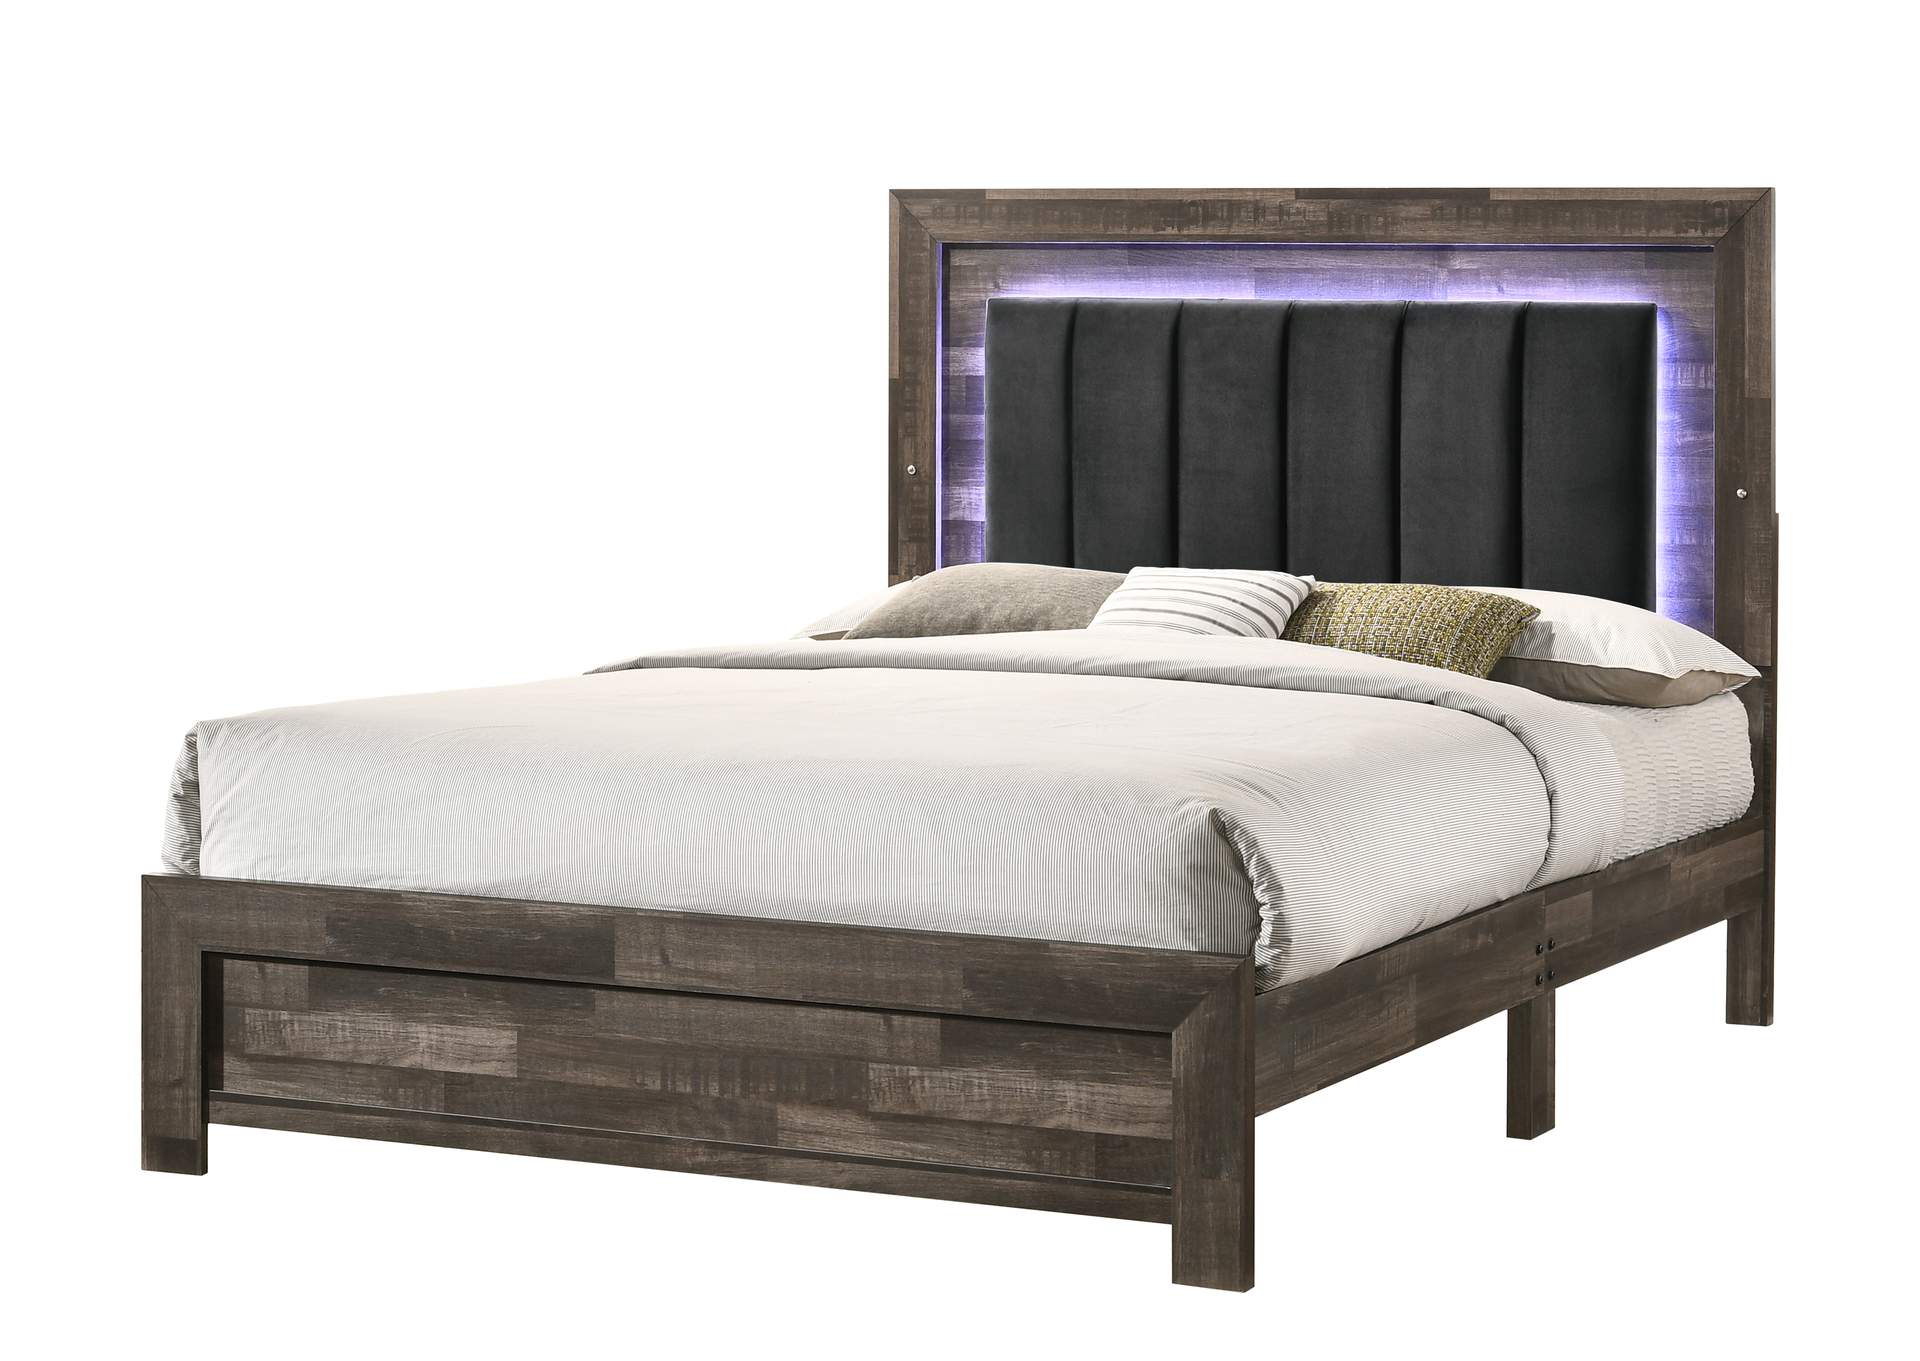 Johnny Brown Full Bed w/ LED,Titanic Furniture